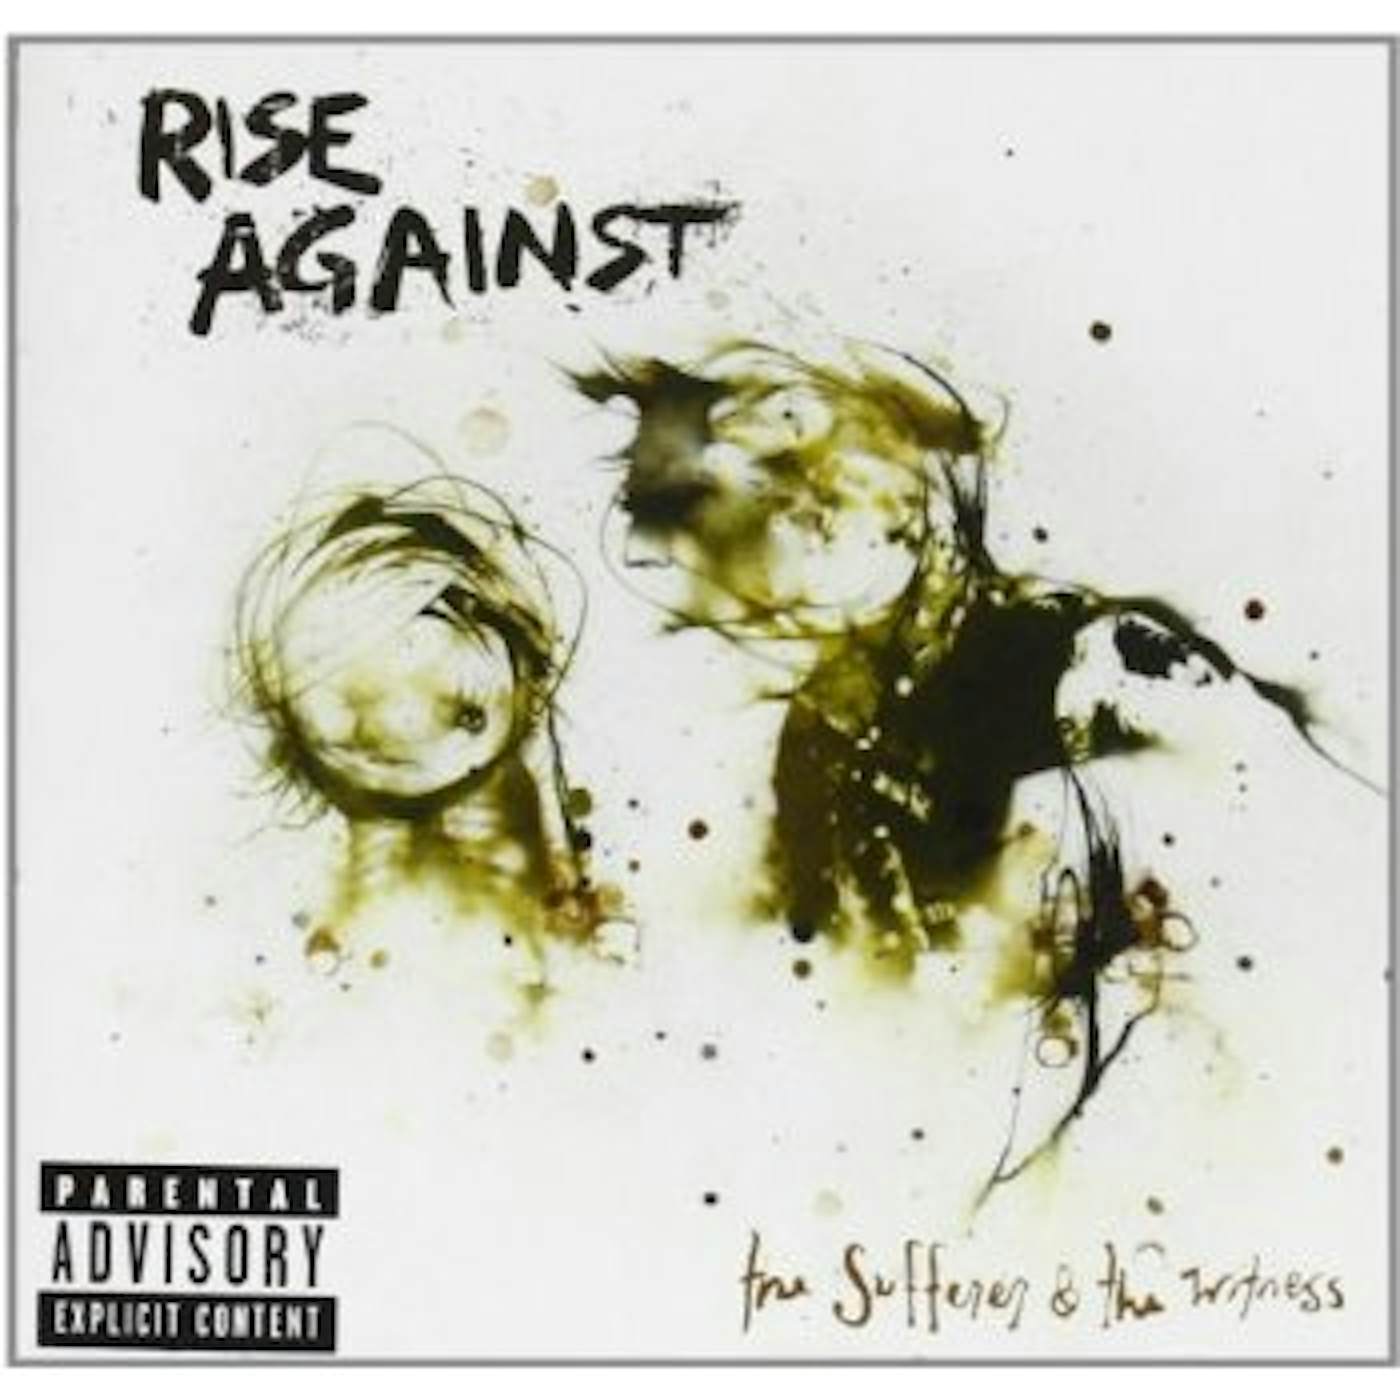 Rise Against SUFFERER & THE WITNESS CD